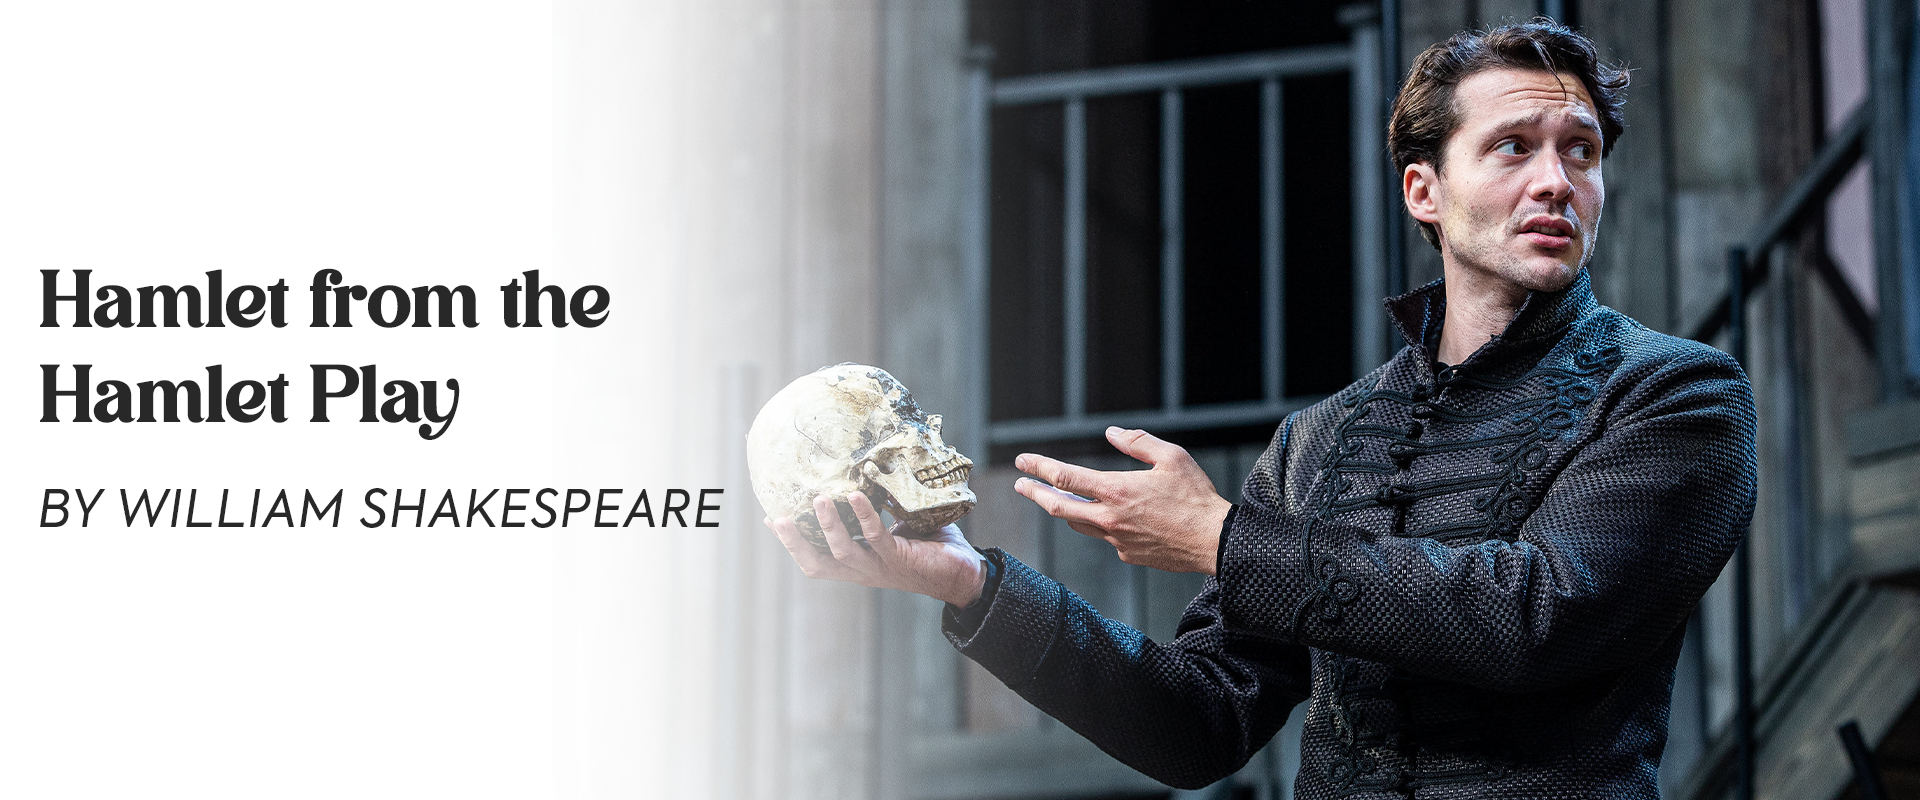 Hamlet from the Hamlet Play by William Shakespeare 